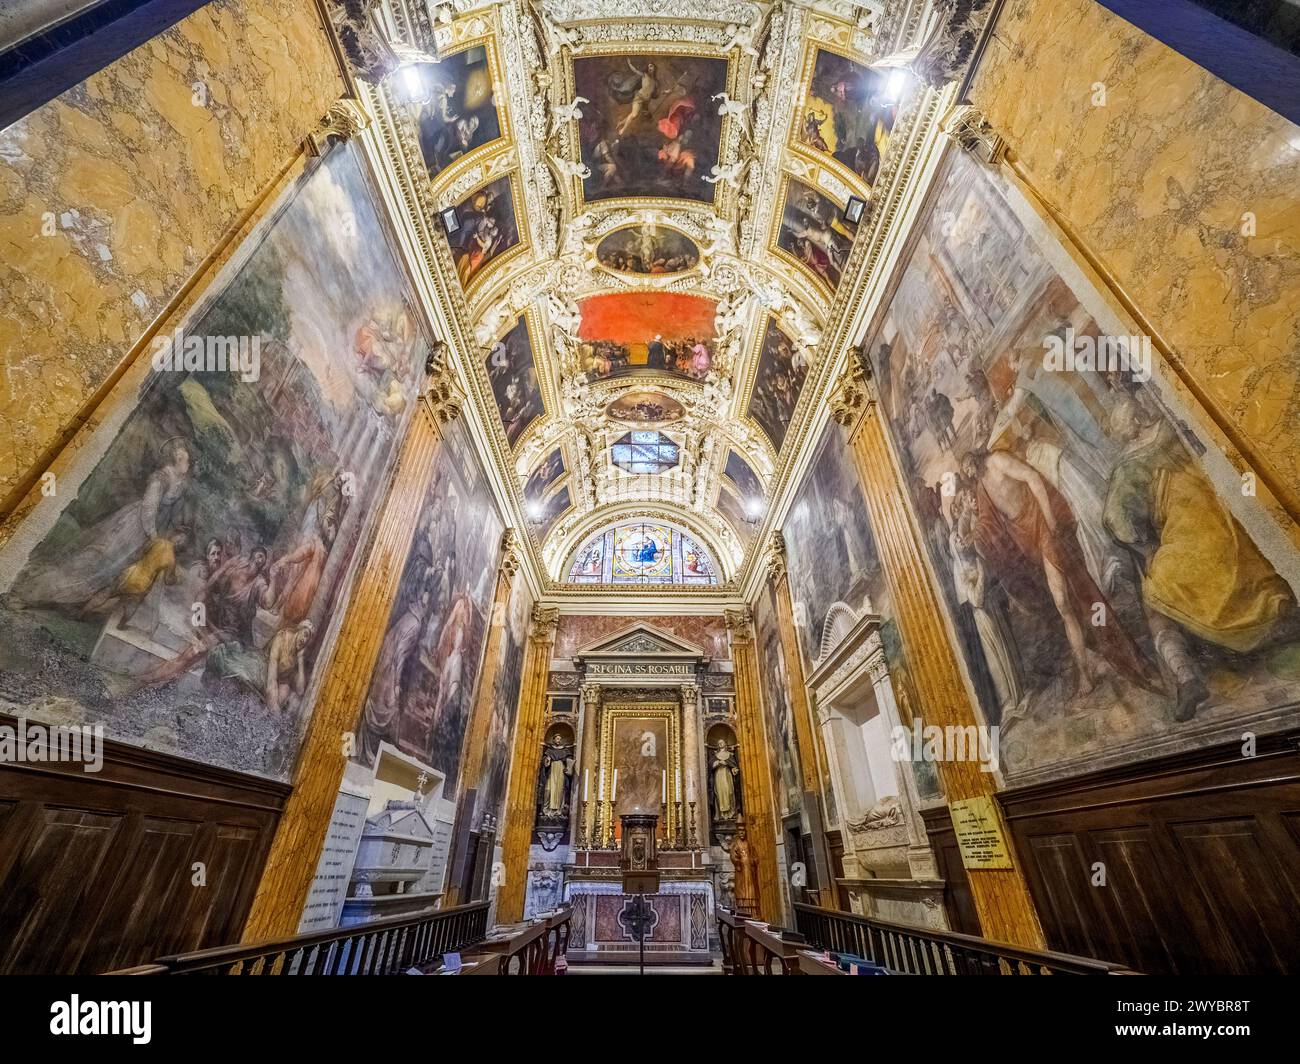 The Capranica chapel is also known as the Chapel of the Rosary. The stucco ceiling was made in 1573 by Marcello Venusti. The chapel contains the tomb of Cardinal Domenico Capranica by Andrea Bregno - Basilica di Santa Maria sopra Minerva - Rome, Italy Stock Photo